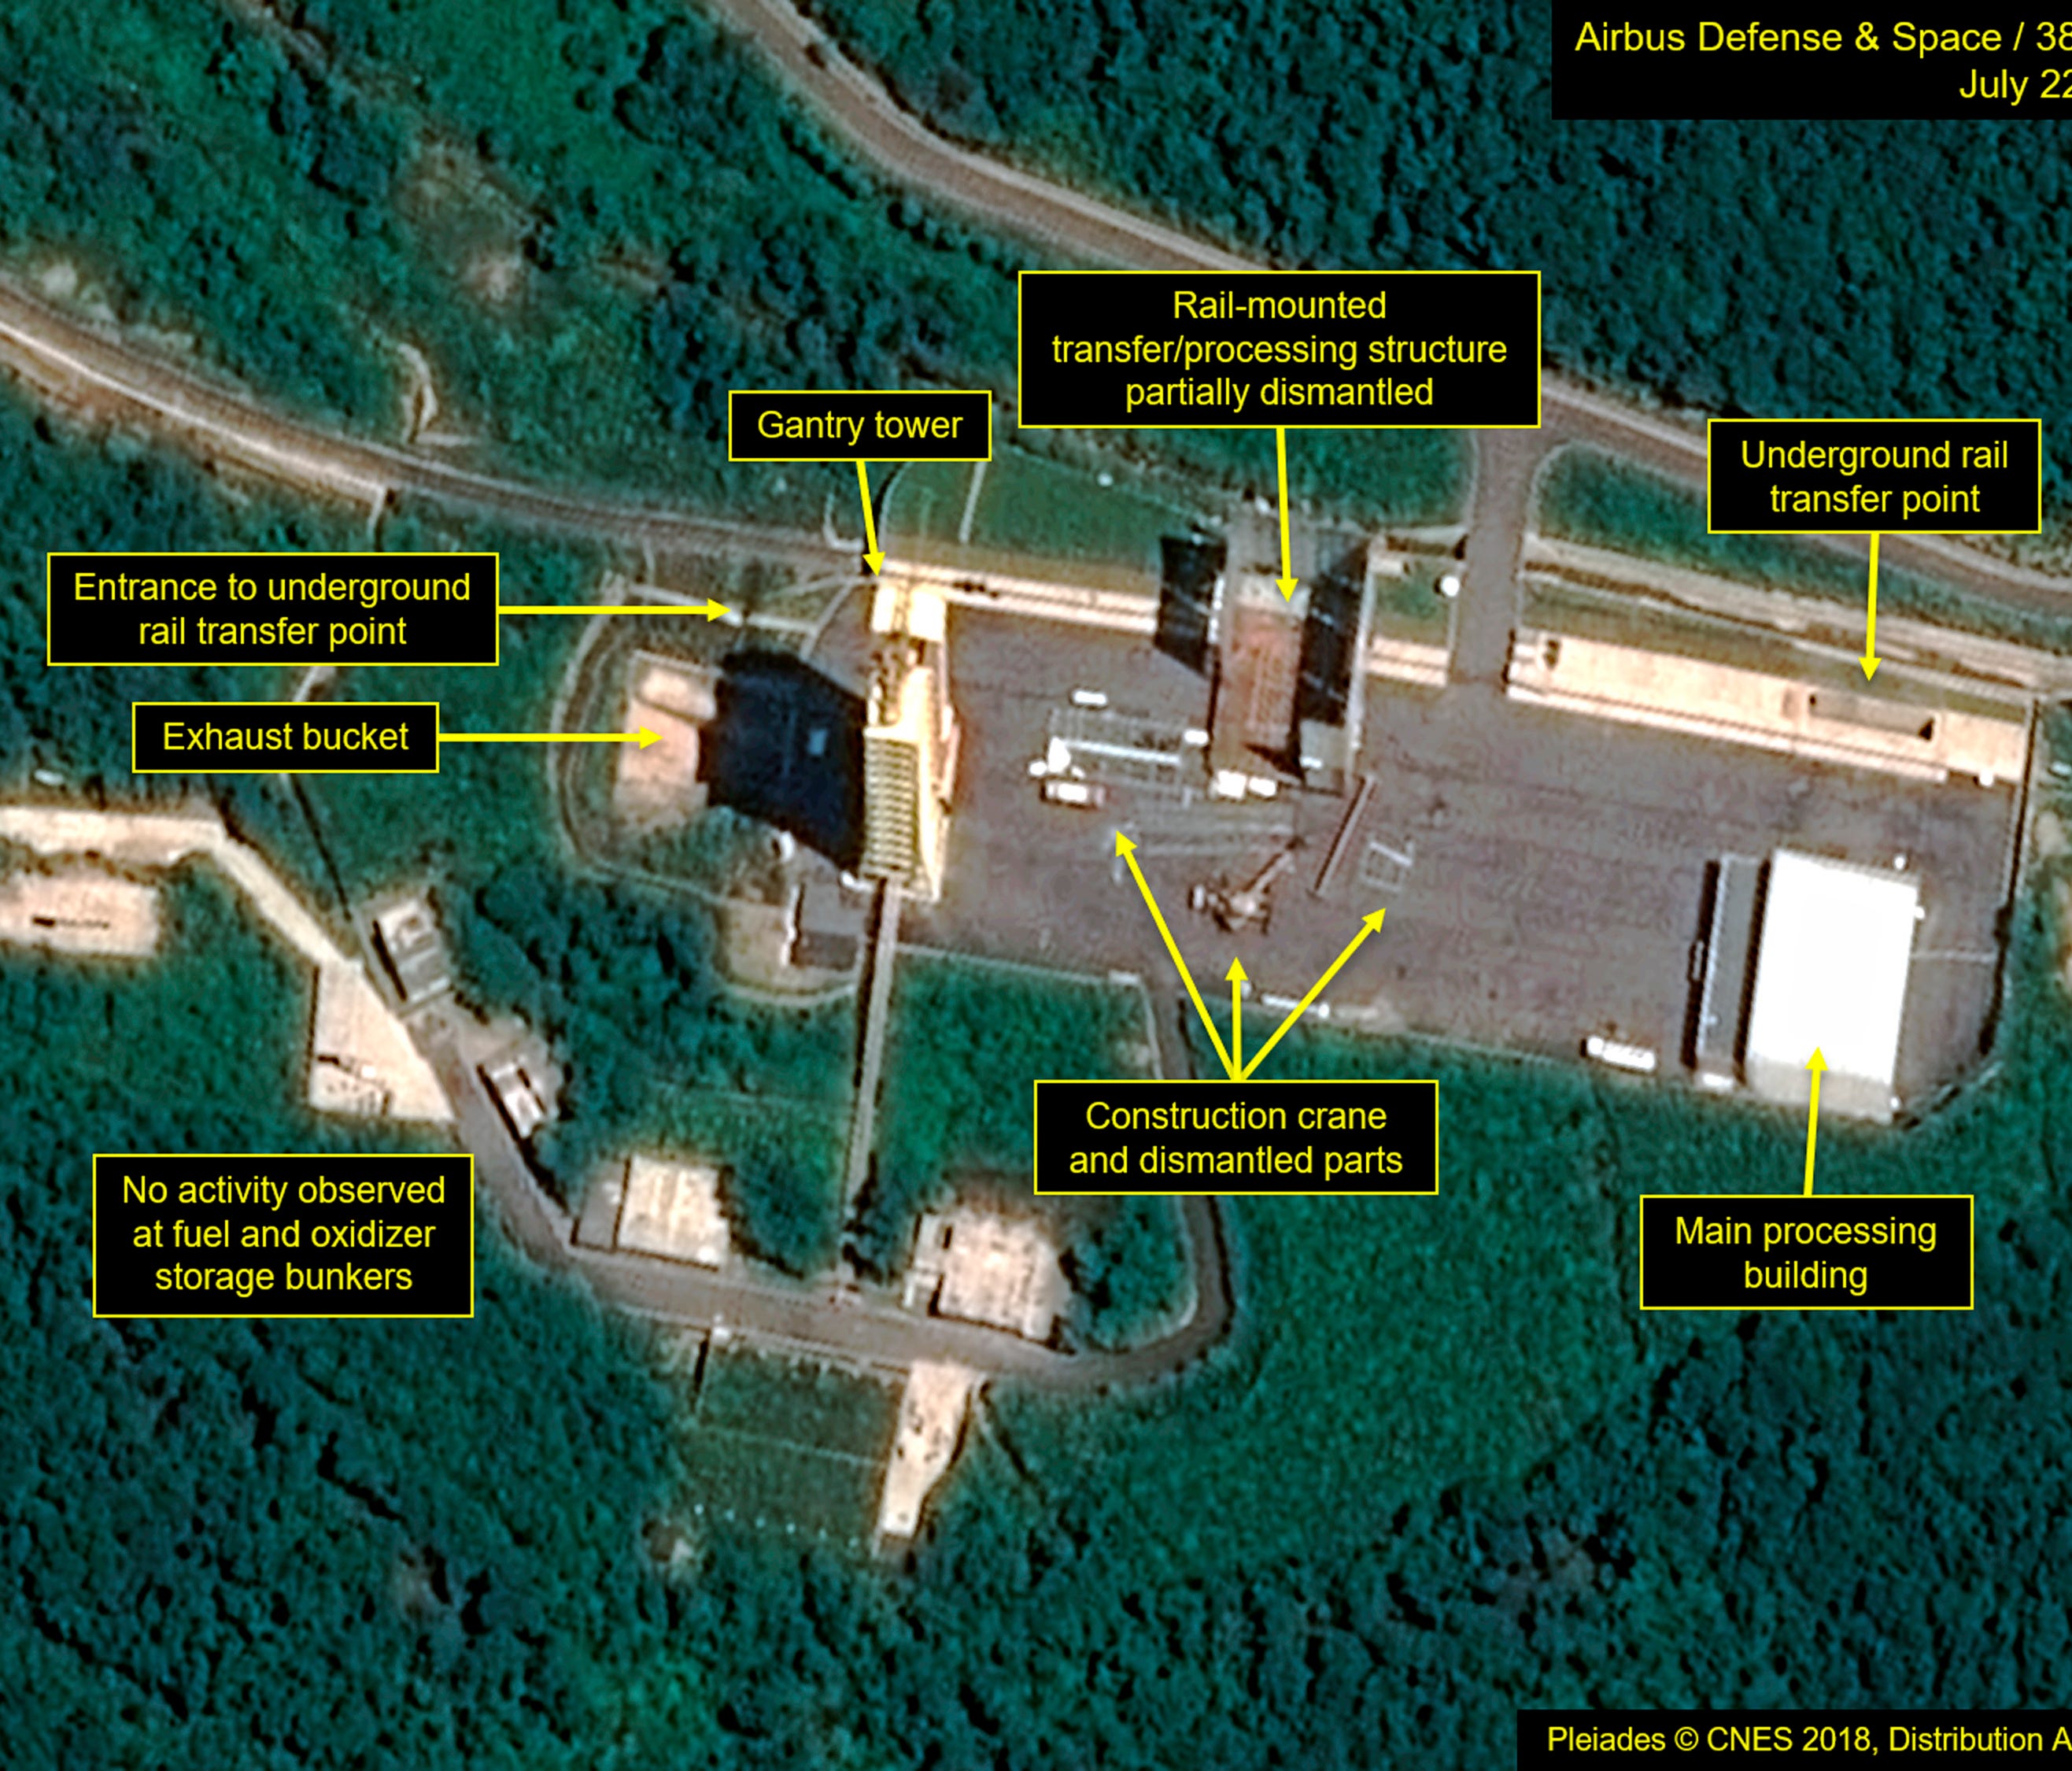 This July 22, 2018, satellite image released and annotated by 38 North on Monday, July 23, shows what the U.S. research group says is the partial dismantling of the rail-mounted transfer structure, at center, at the Sohae launch site in North Korea.